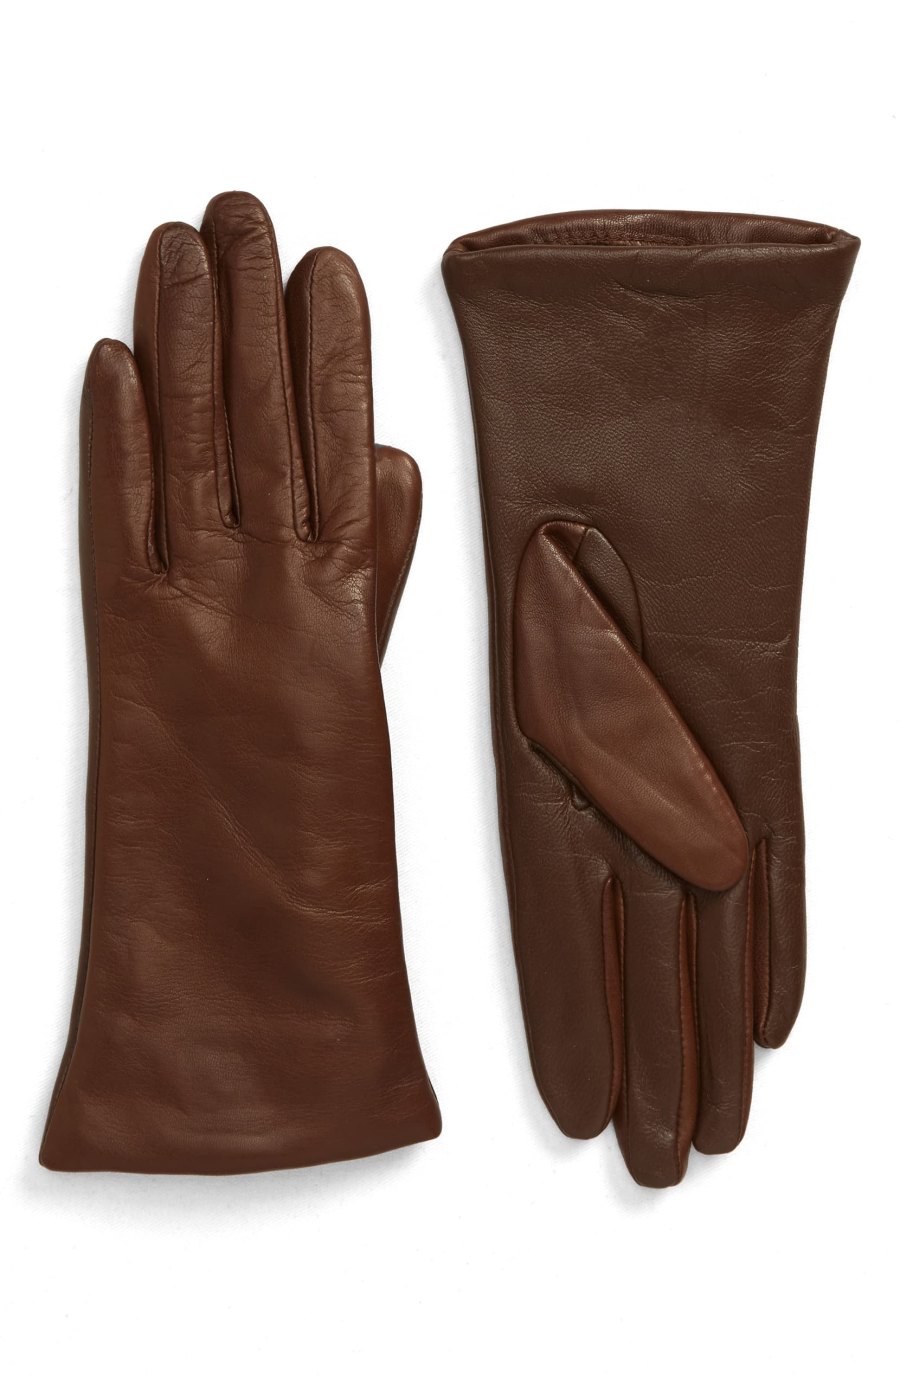 These Nordstrom Leather Gloves Will Keep Hands Warm at All Times | UsWeekly